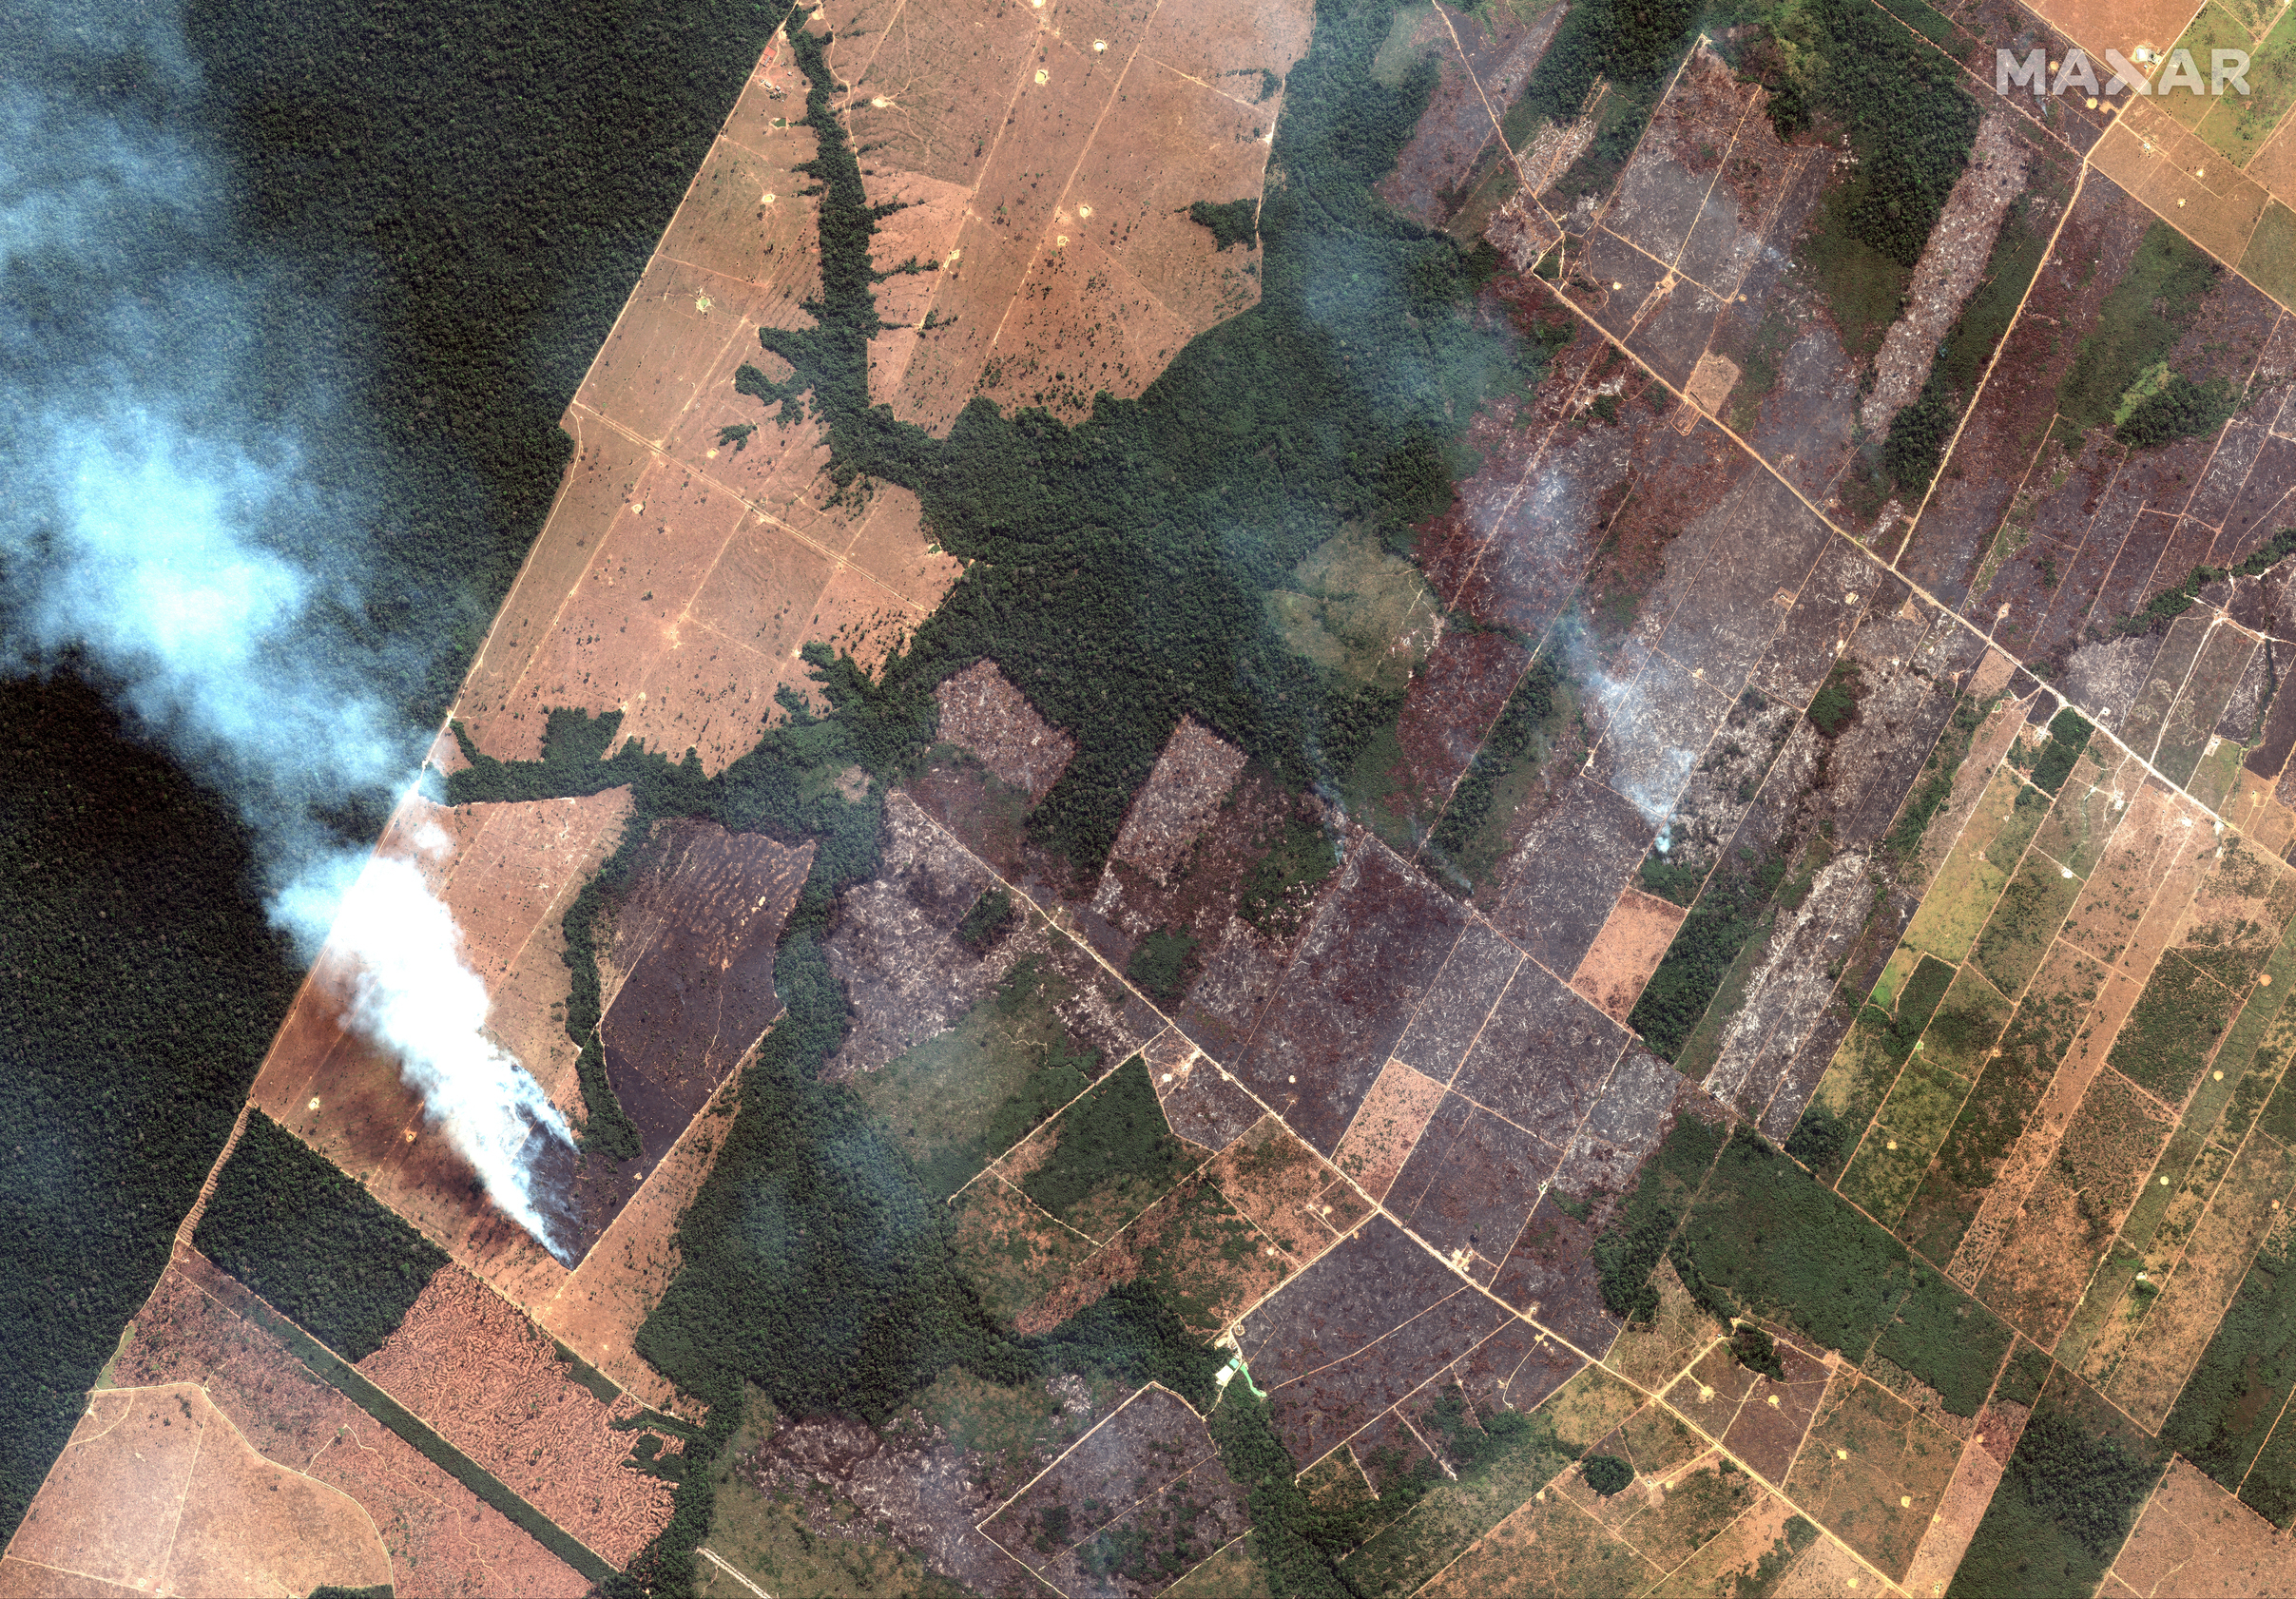 Fires burning in the State of Rondonia, Brazil, in the upper Amazon River basin